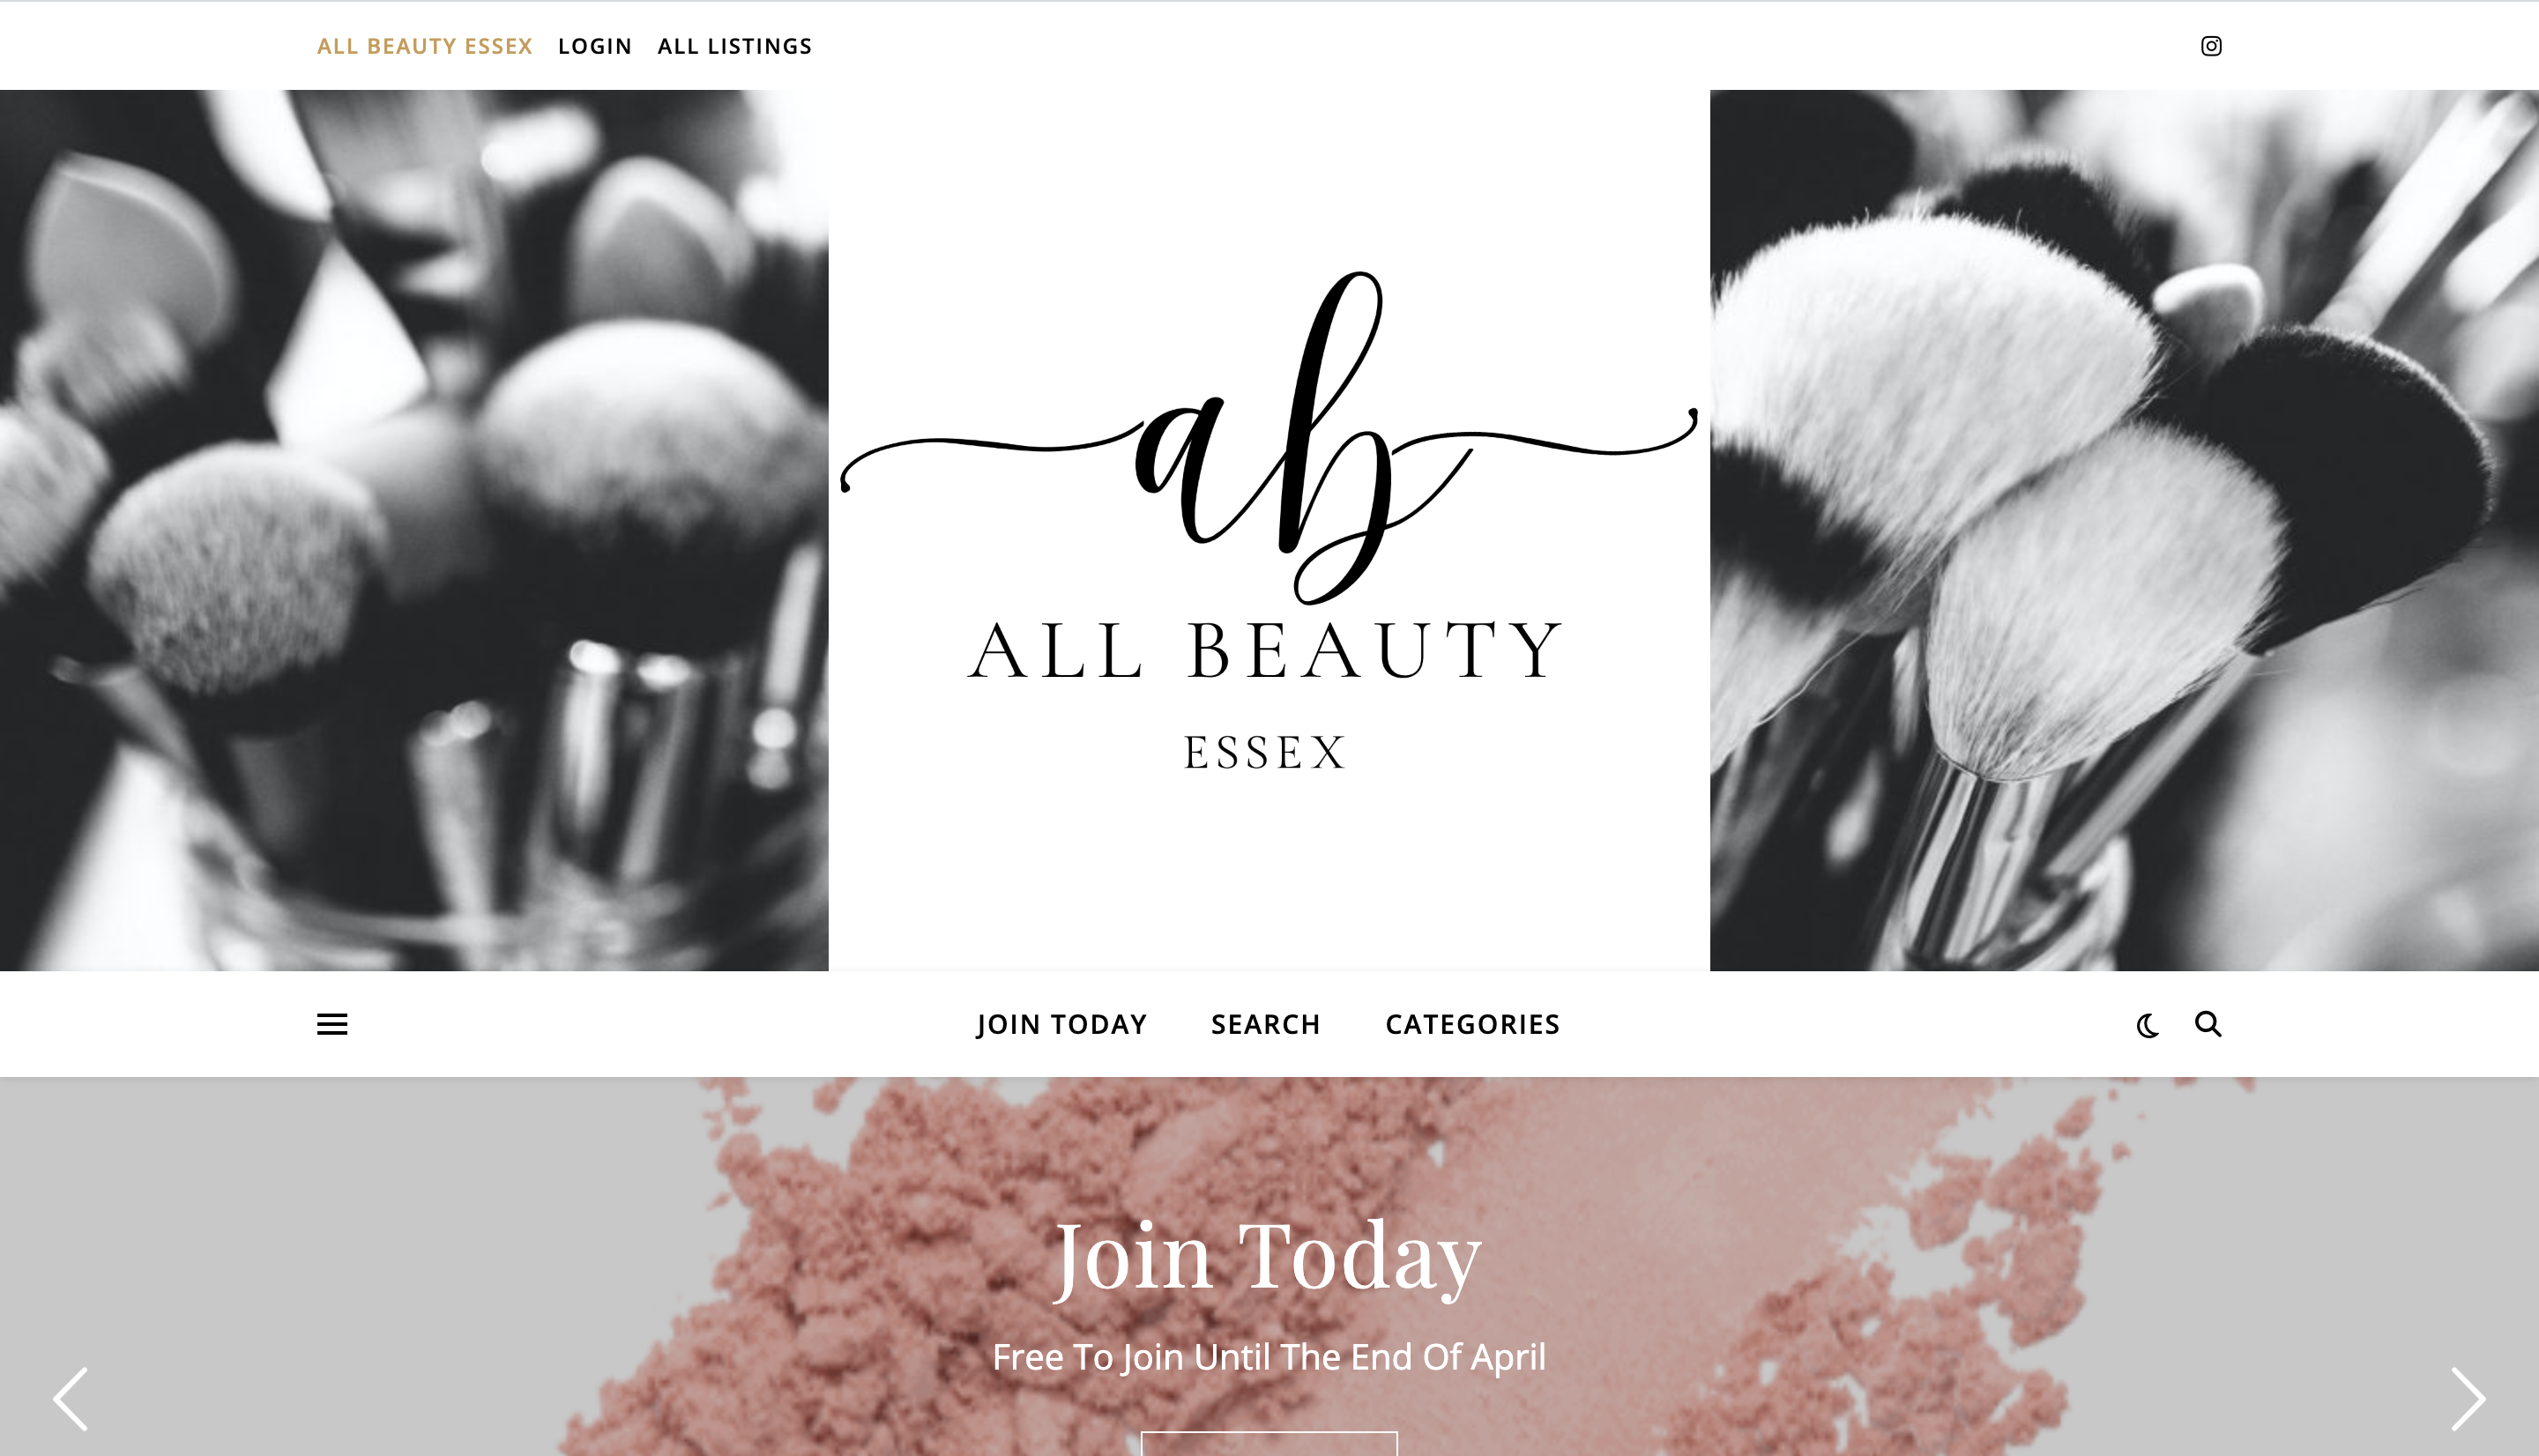 All Beauty essex Homepage